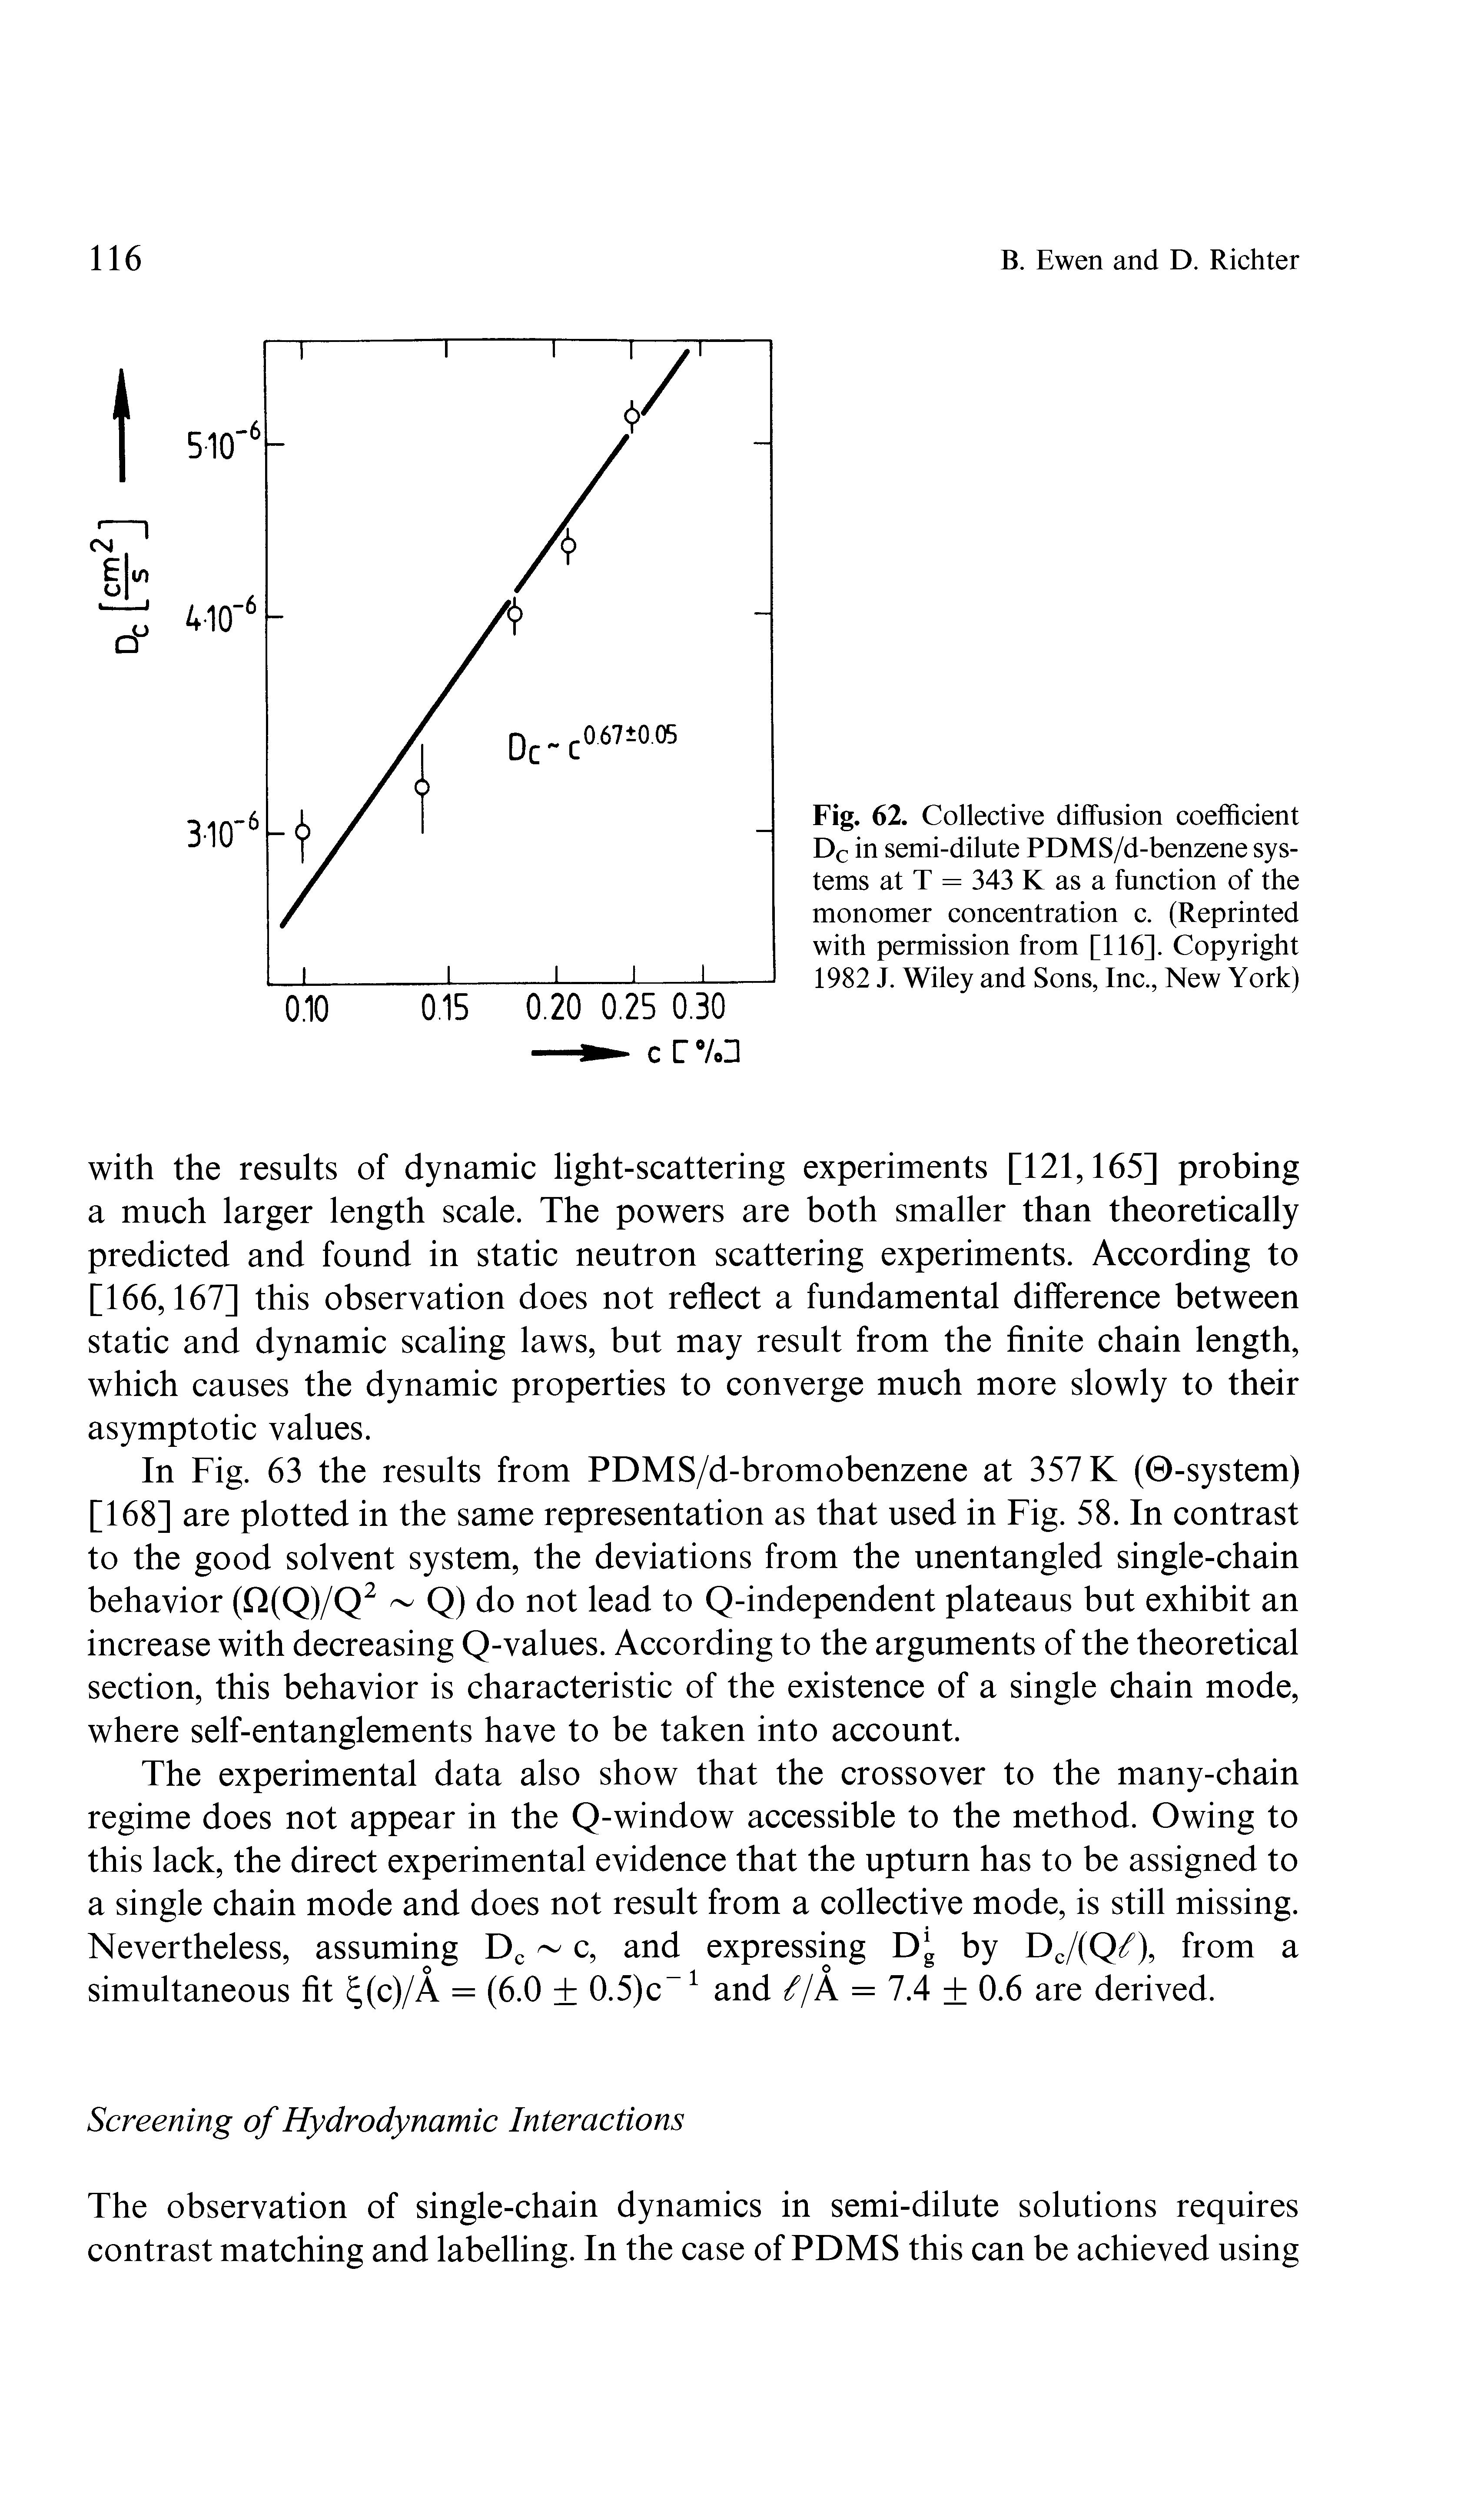 Fig. 62. Collective diffusion coefficient Dc in semi-dilute PDMS/d-benzene systems at T = 343 K as a function of the monomer concentration c. (Reprinted with permission from [116]. Copyright 1982 J. Wiley and Sons, Inc., New York)...